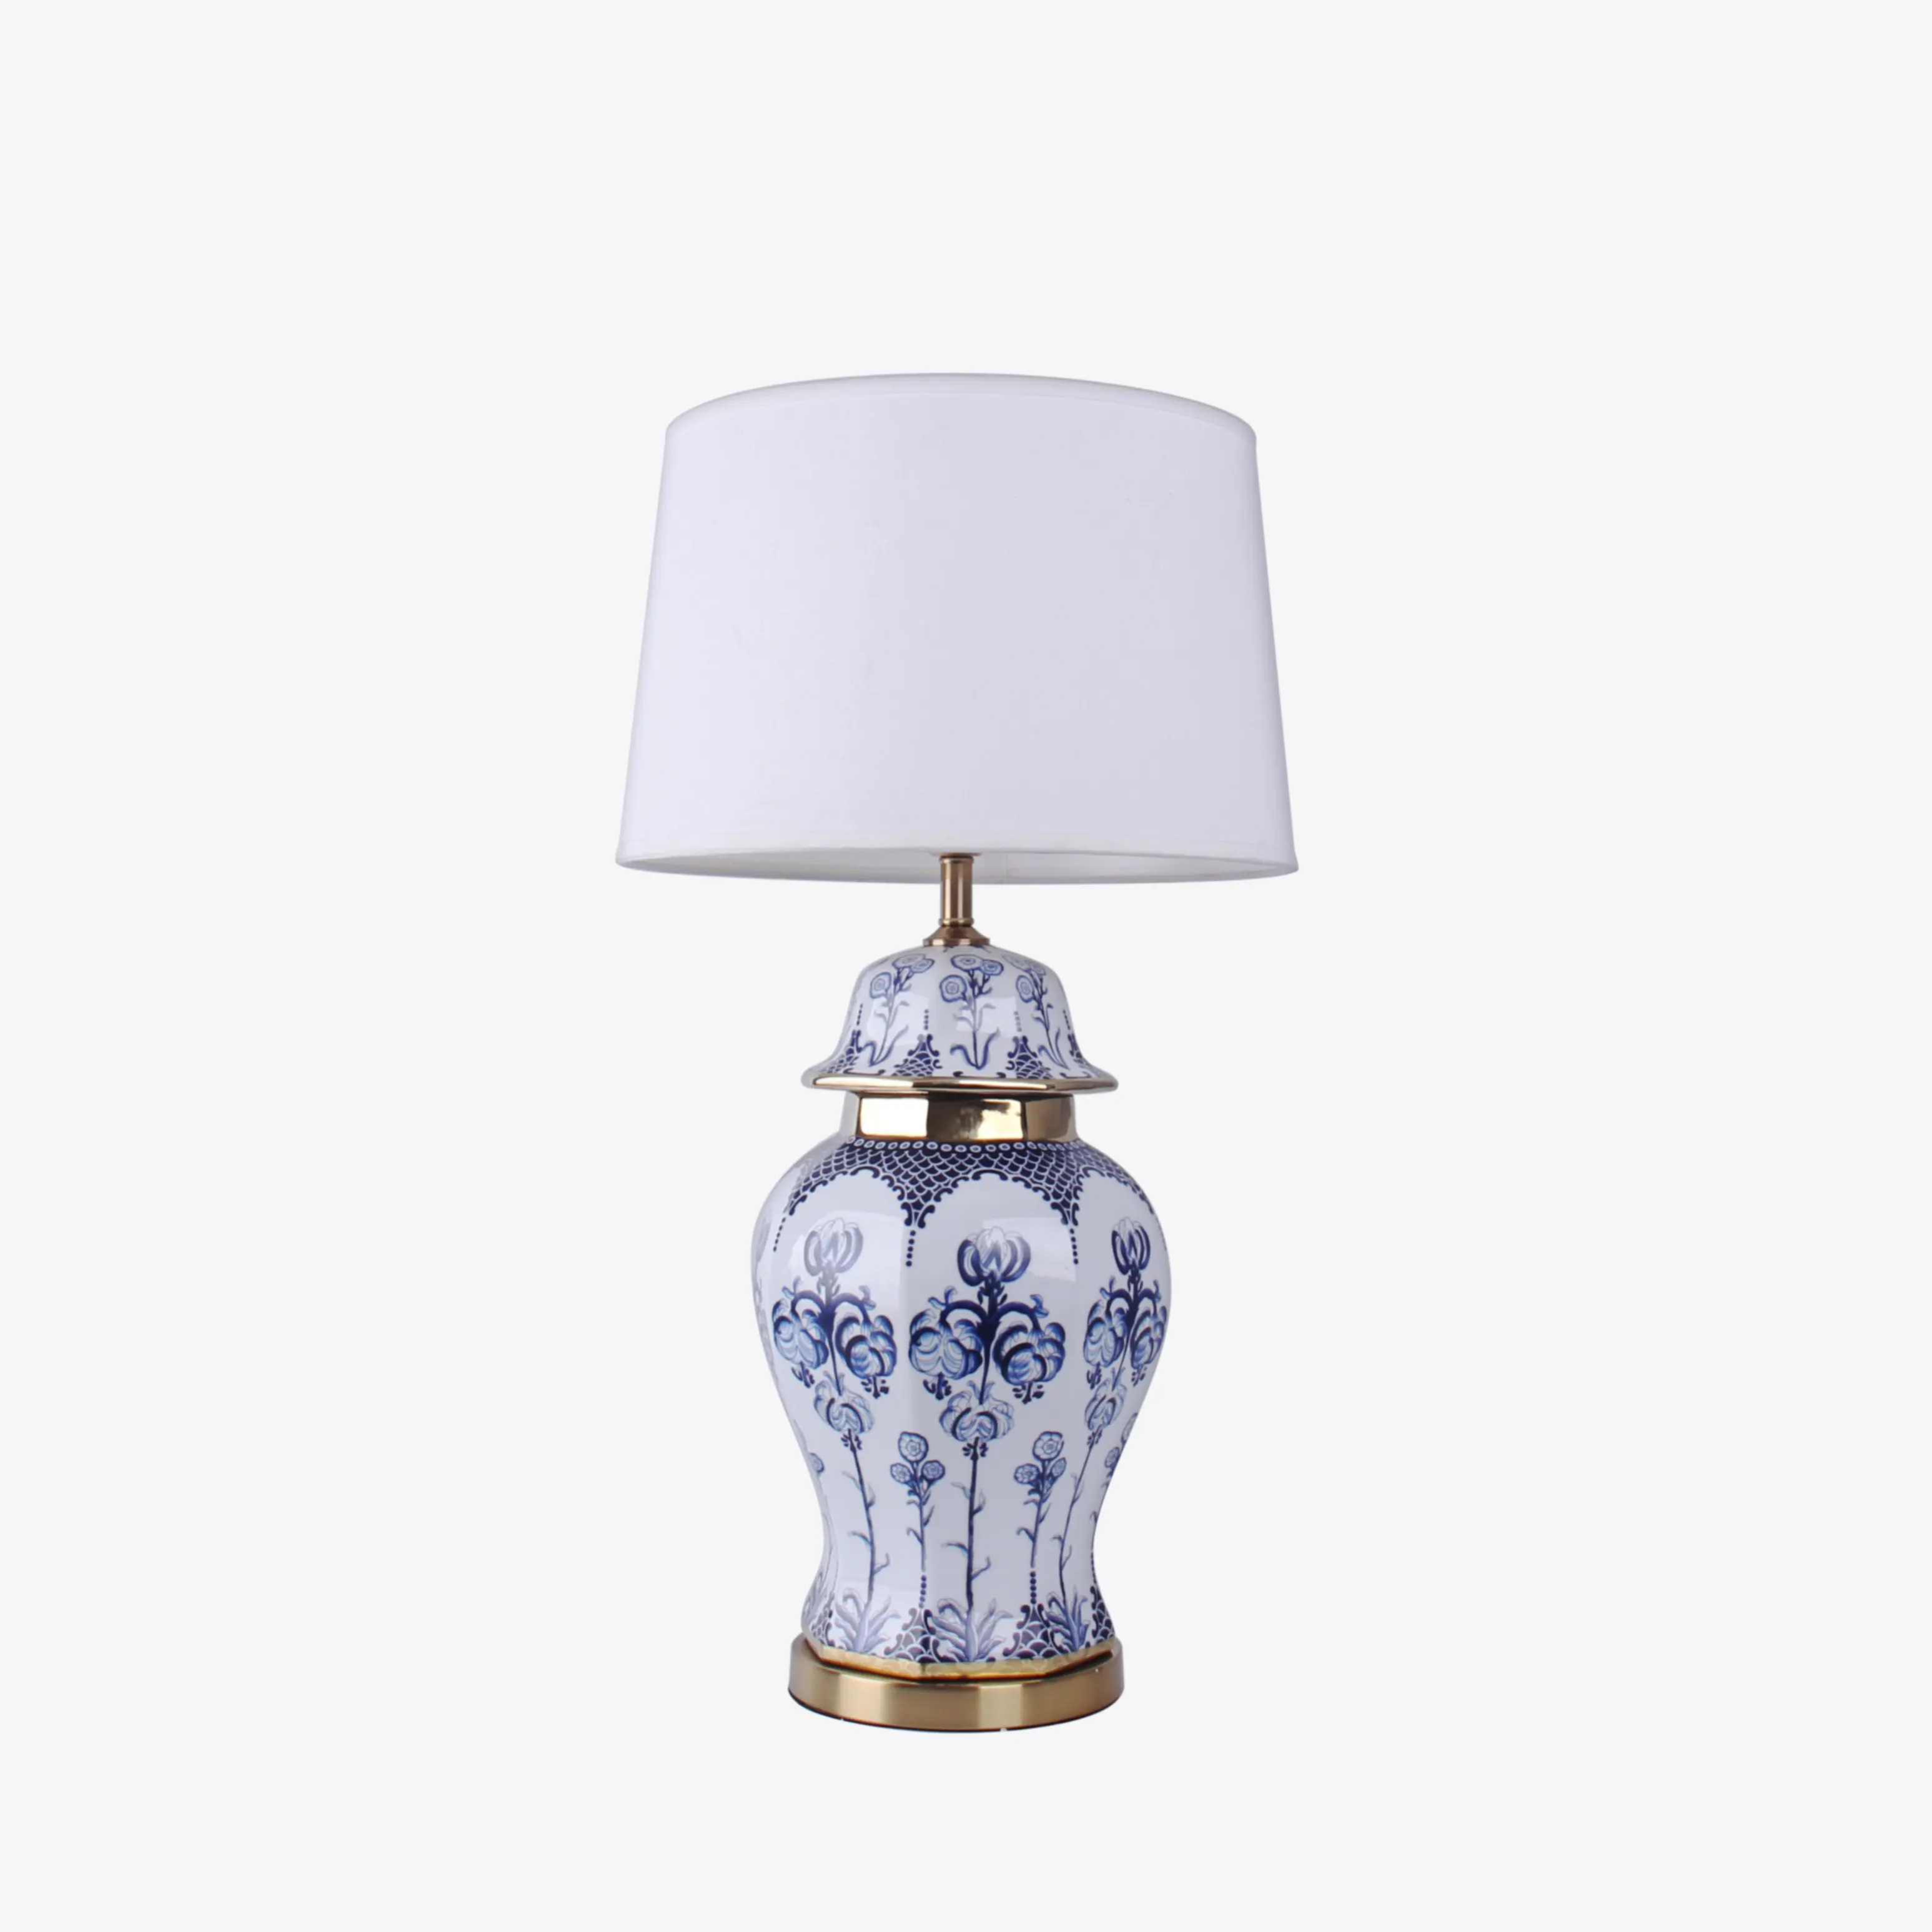 Amazon hot living room hotel bedside decoration hand-painted blue and white porcelain table lamp